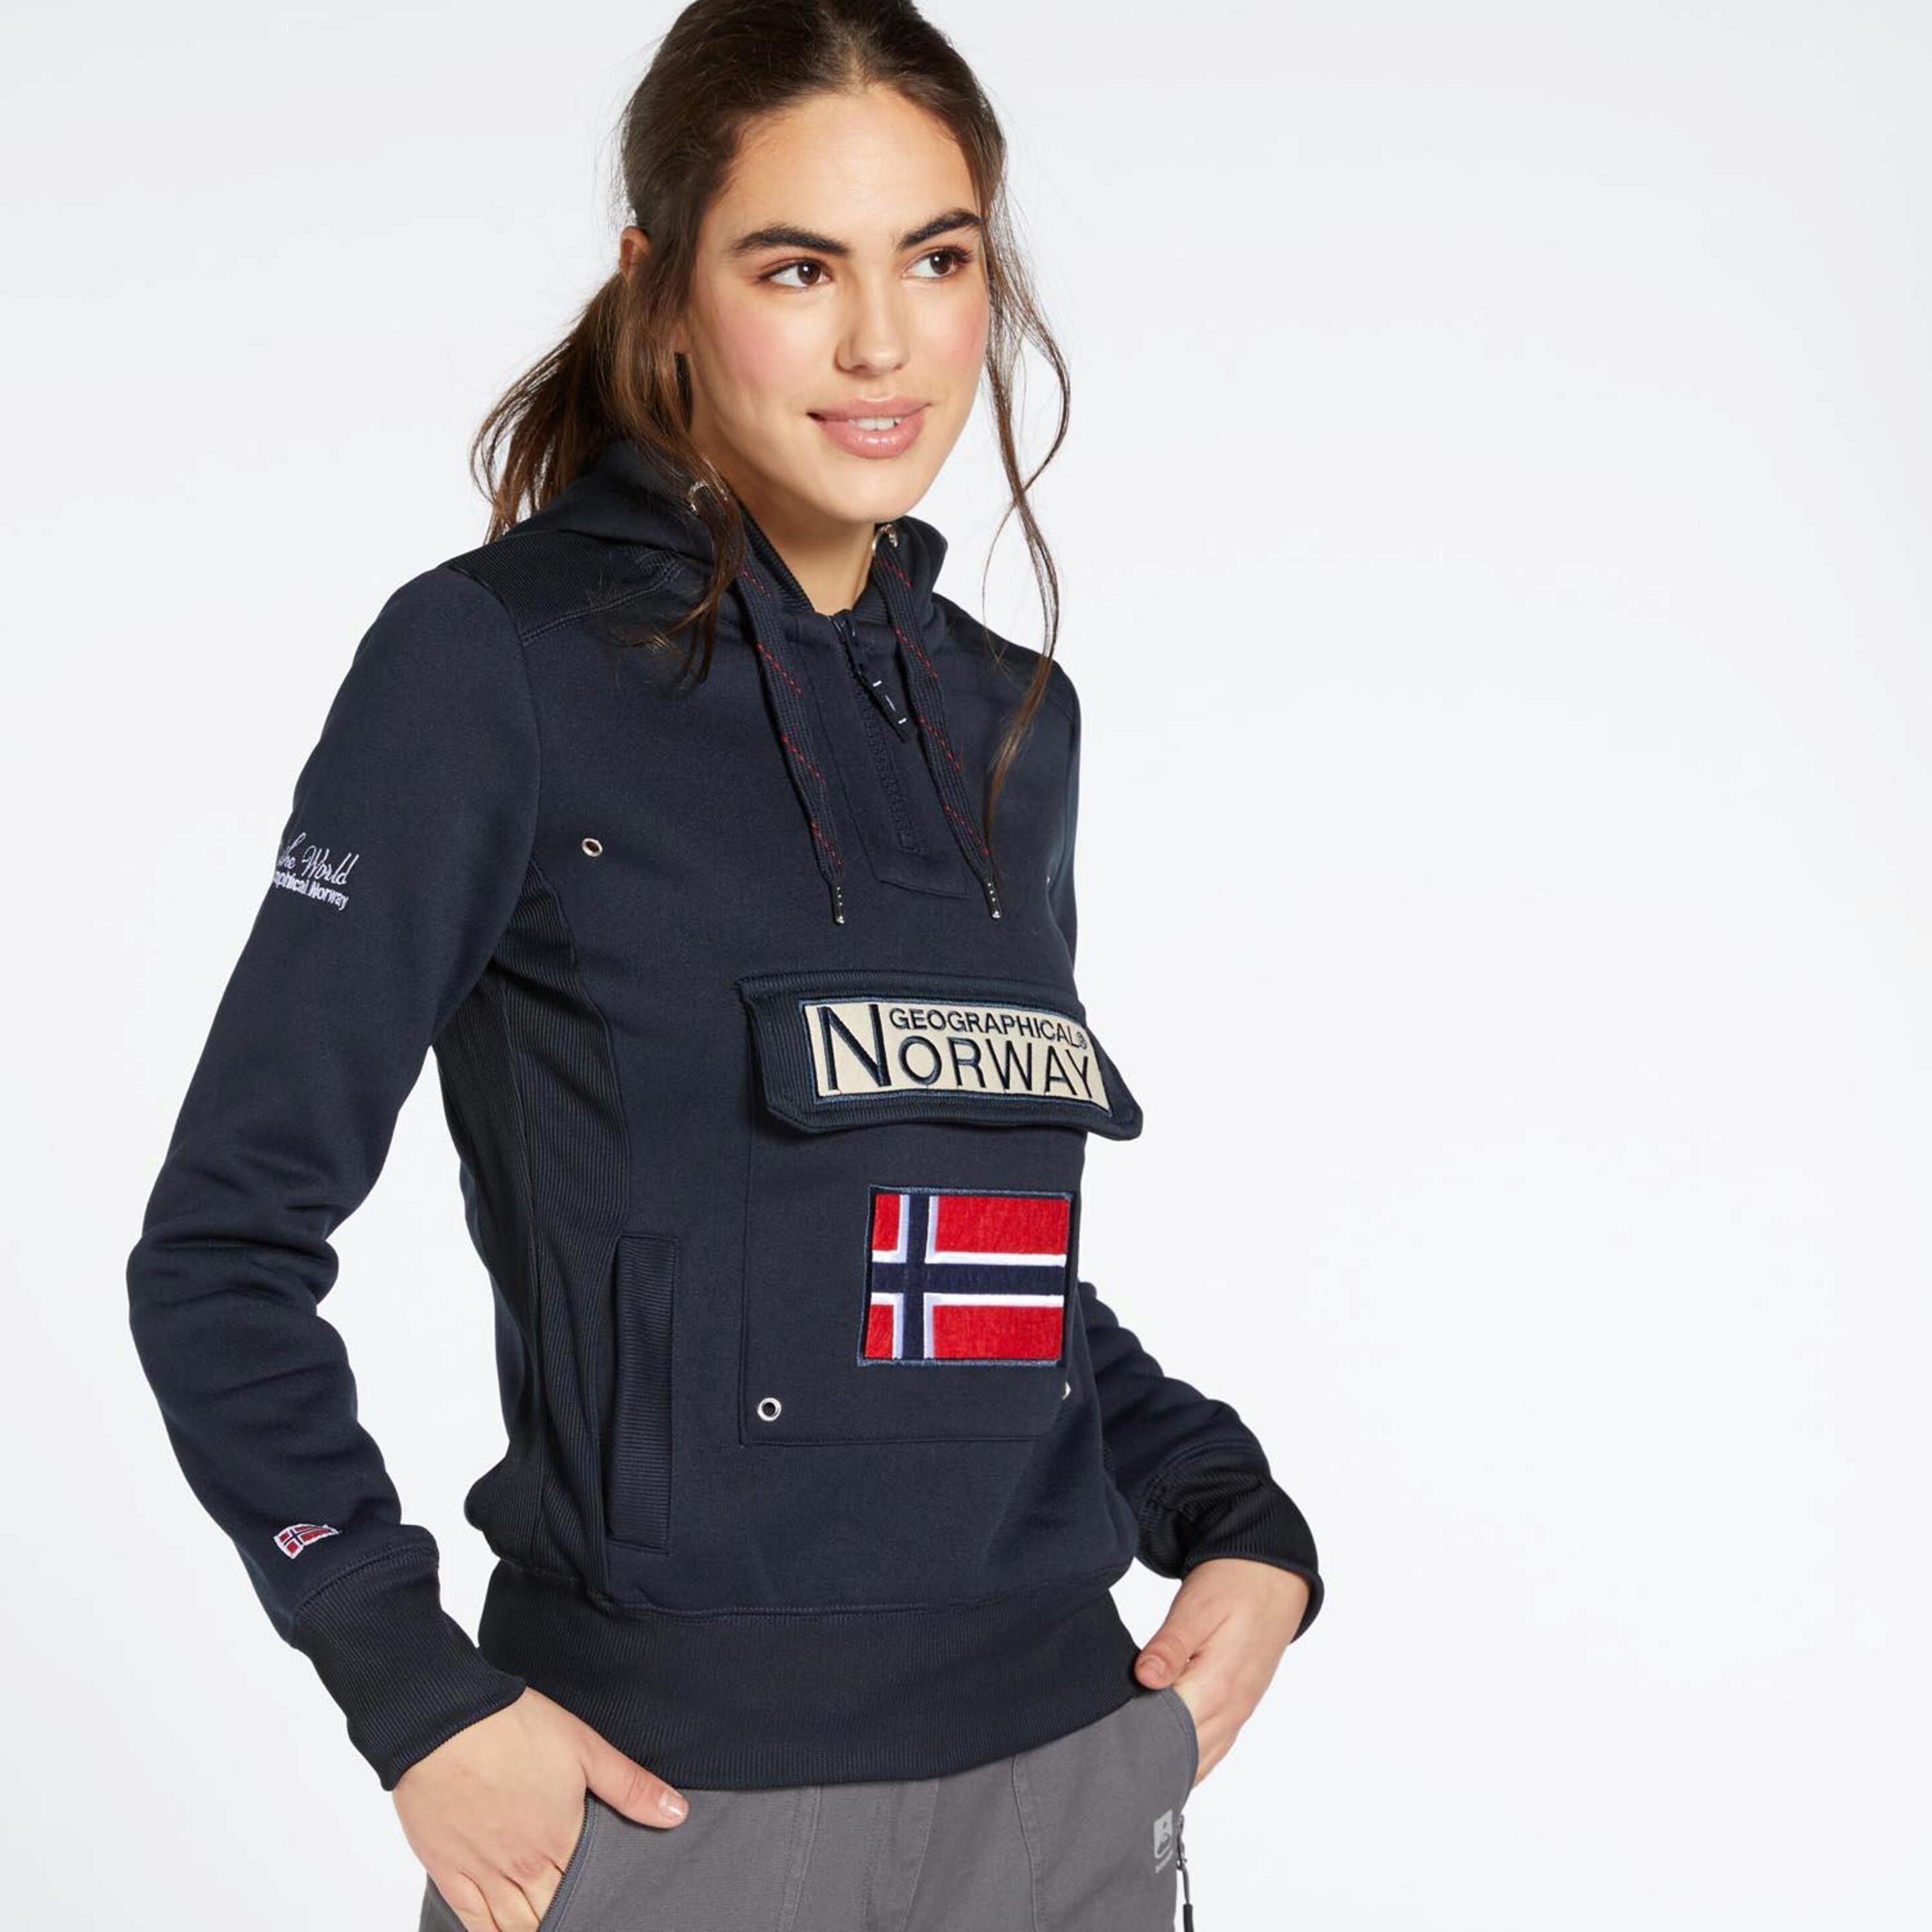 Geographical Geographical Norway Gymclass